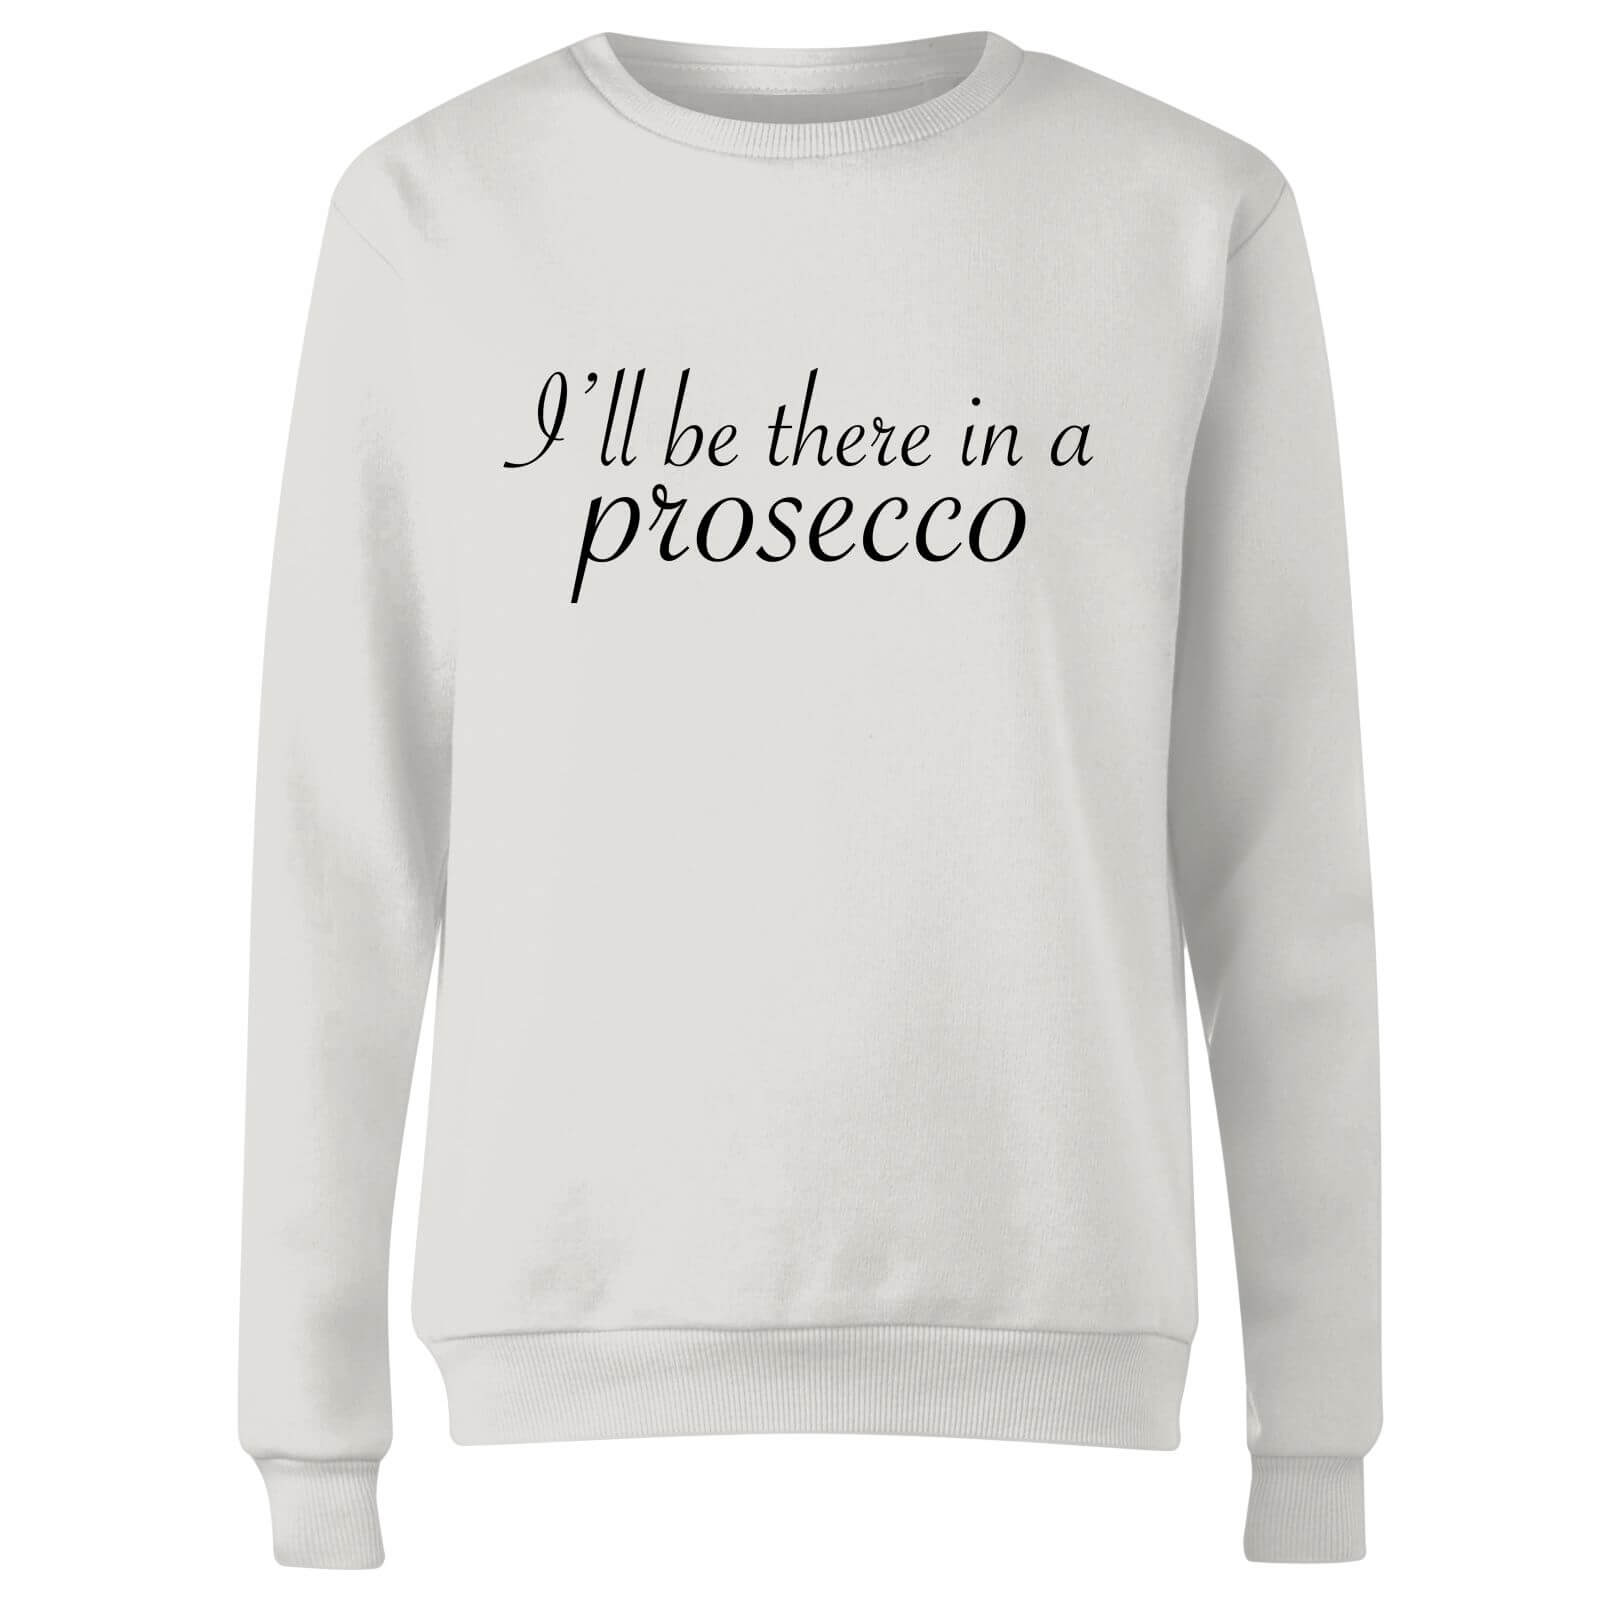 I'll be there in a Prosecco Women's Sweatshirt - White - S - White